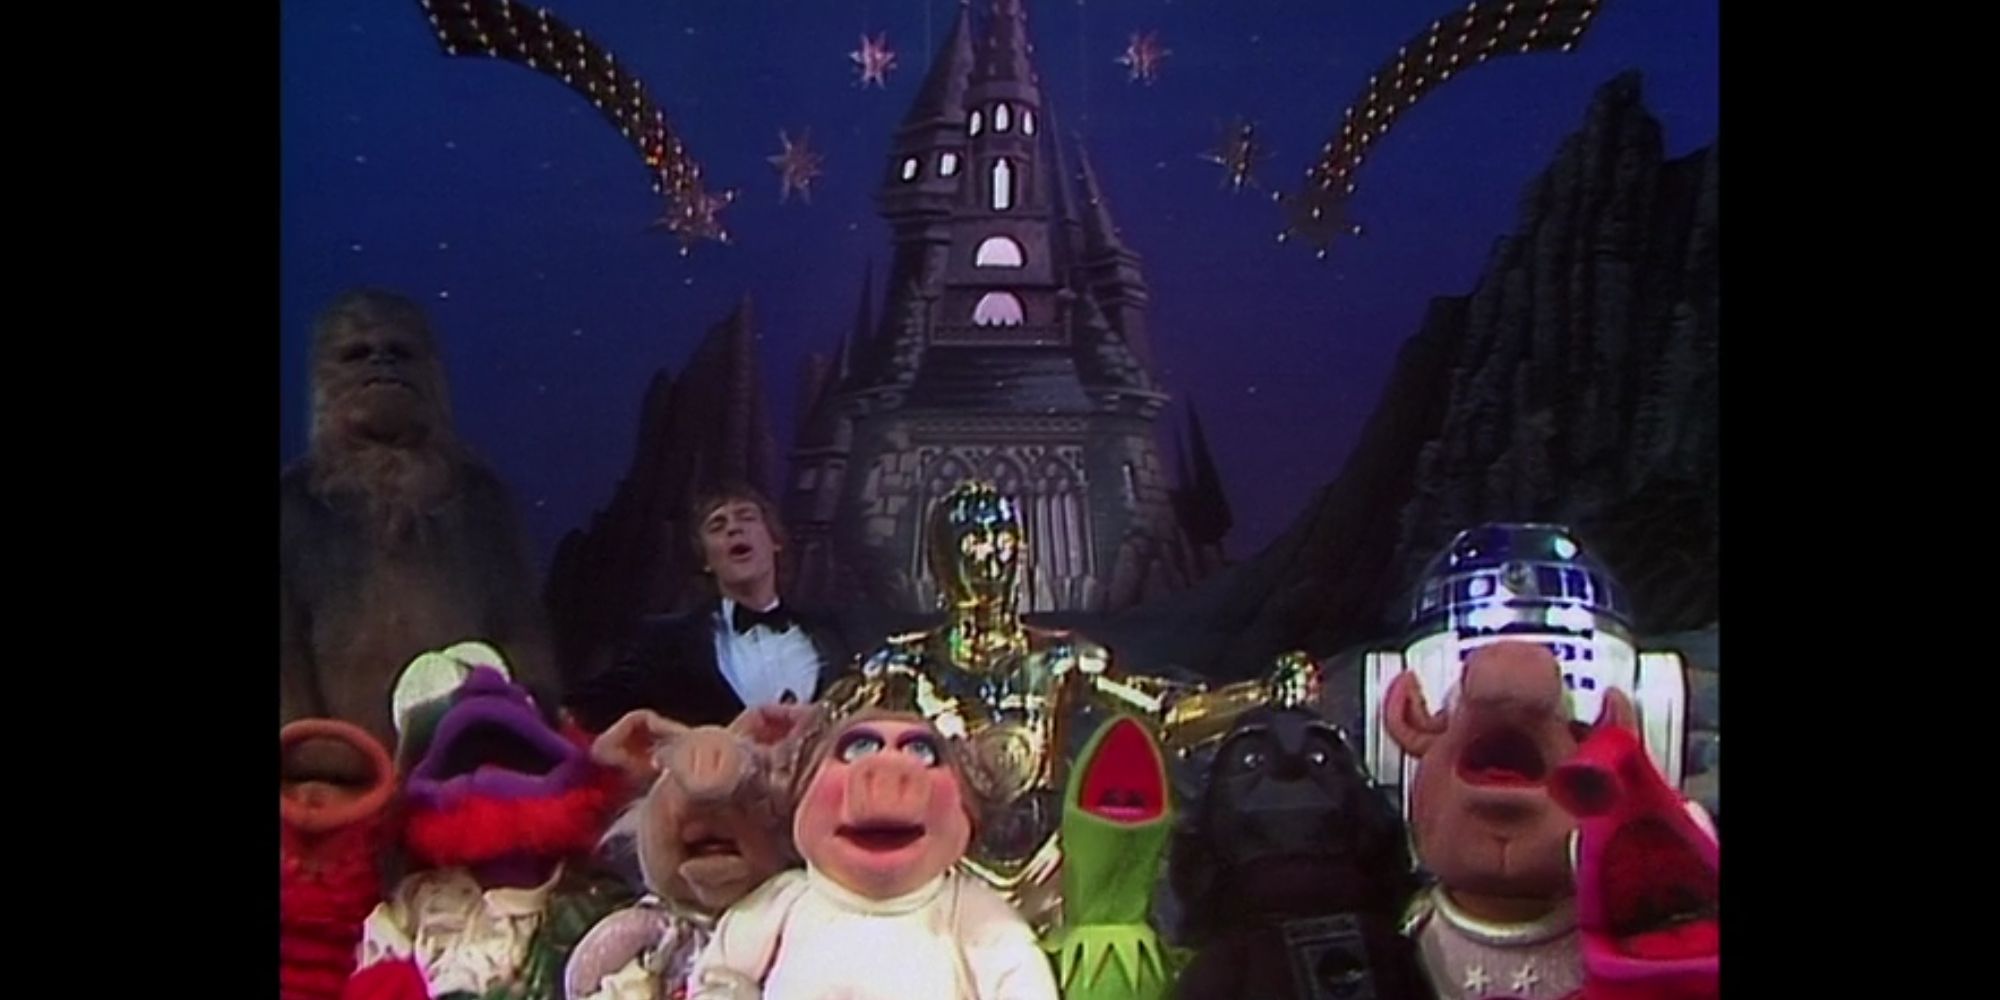 Chewbacca, Mark Hamill, C-3PO, R2-D2, Angus McGonagle, Dr. Strangepork, Miss Piggy, Kermit, Gonzo, Link Hogthrob, and additional muppets sing &quot;When You Wish Upon a Star&quot; as Dearth Nadir's castle rises in the background.